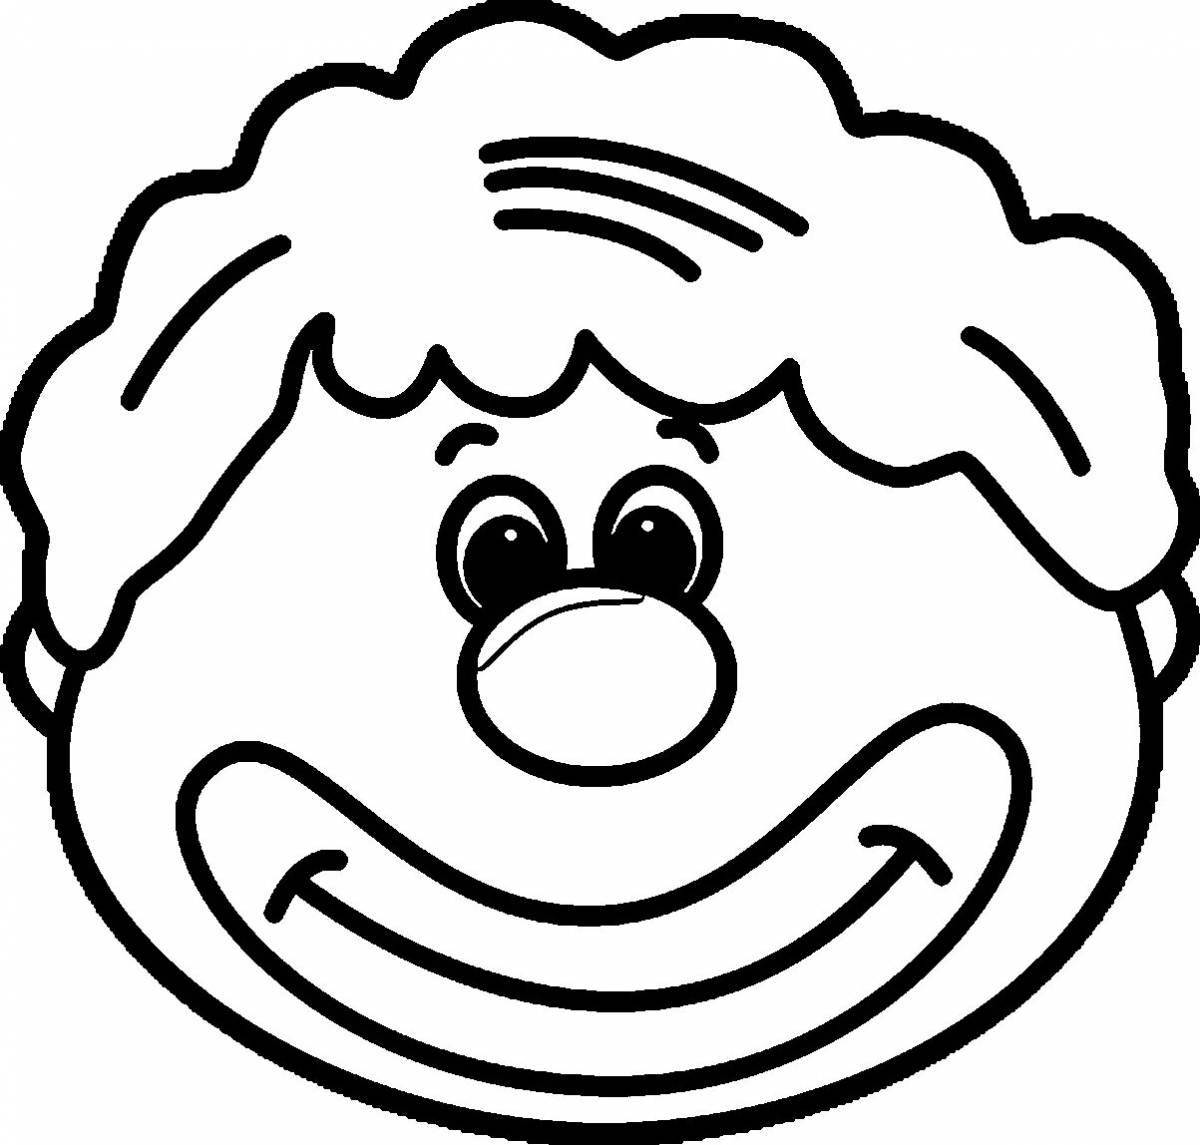 Funny clown coloring page